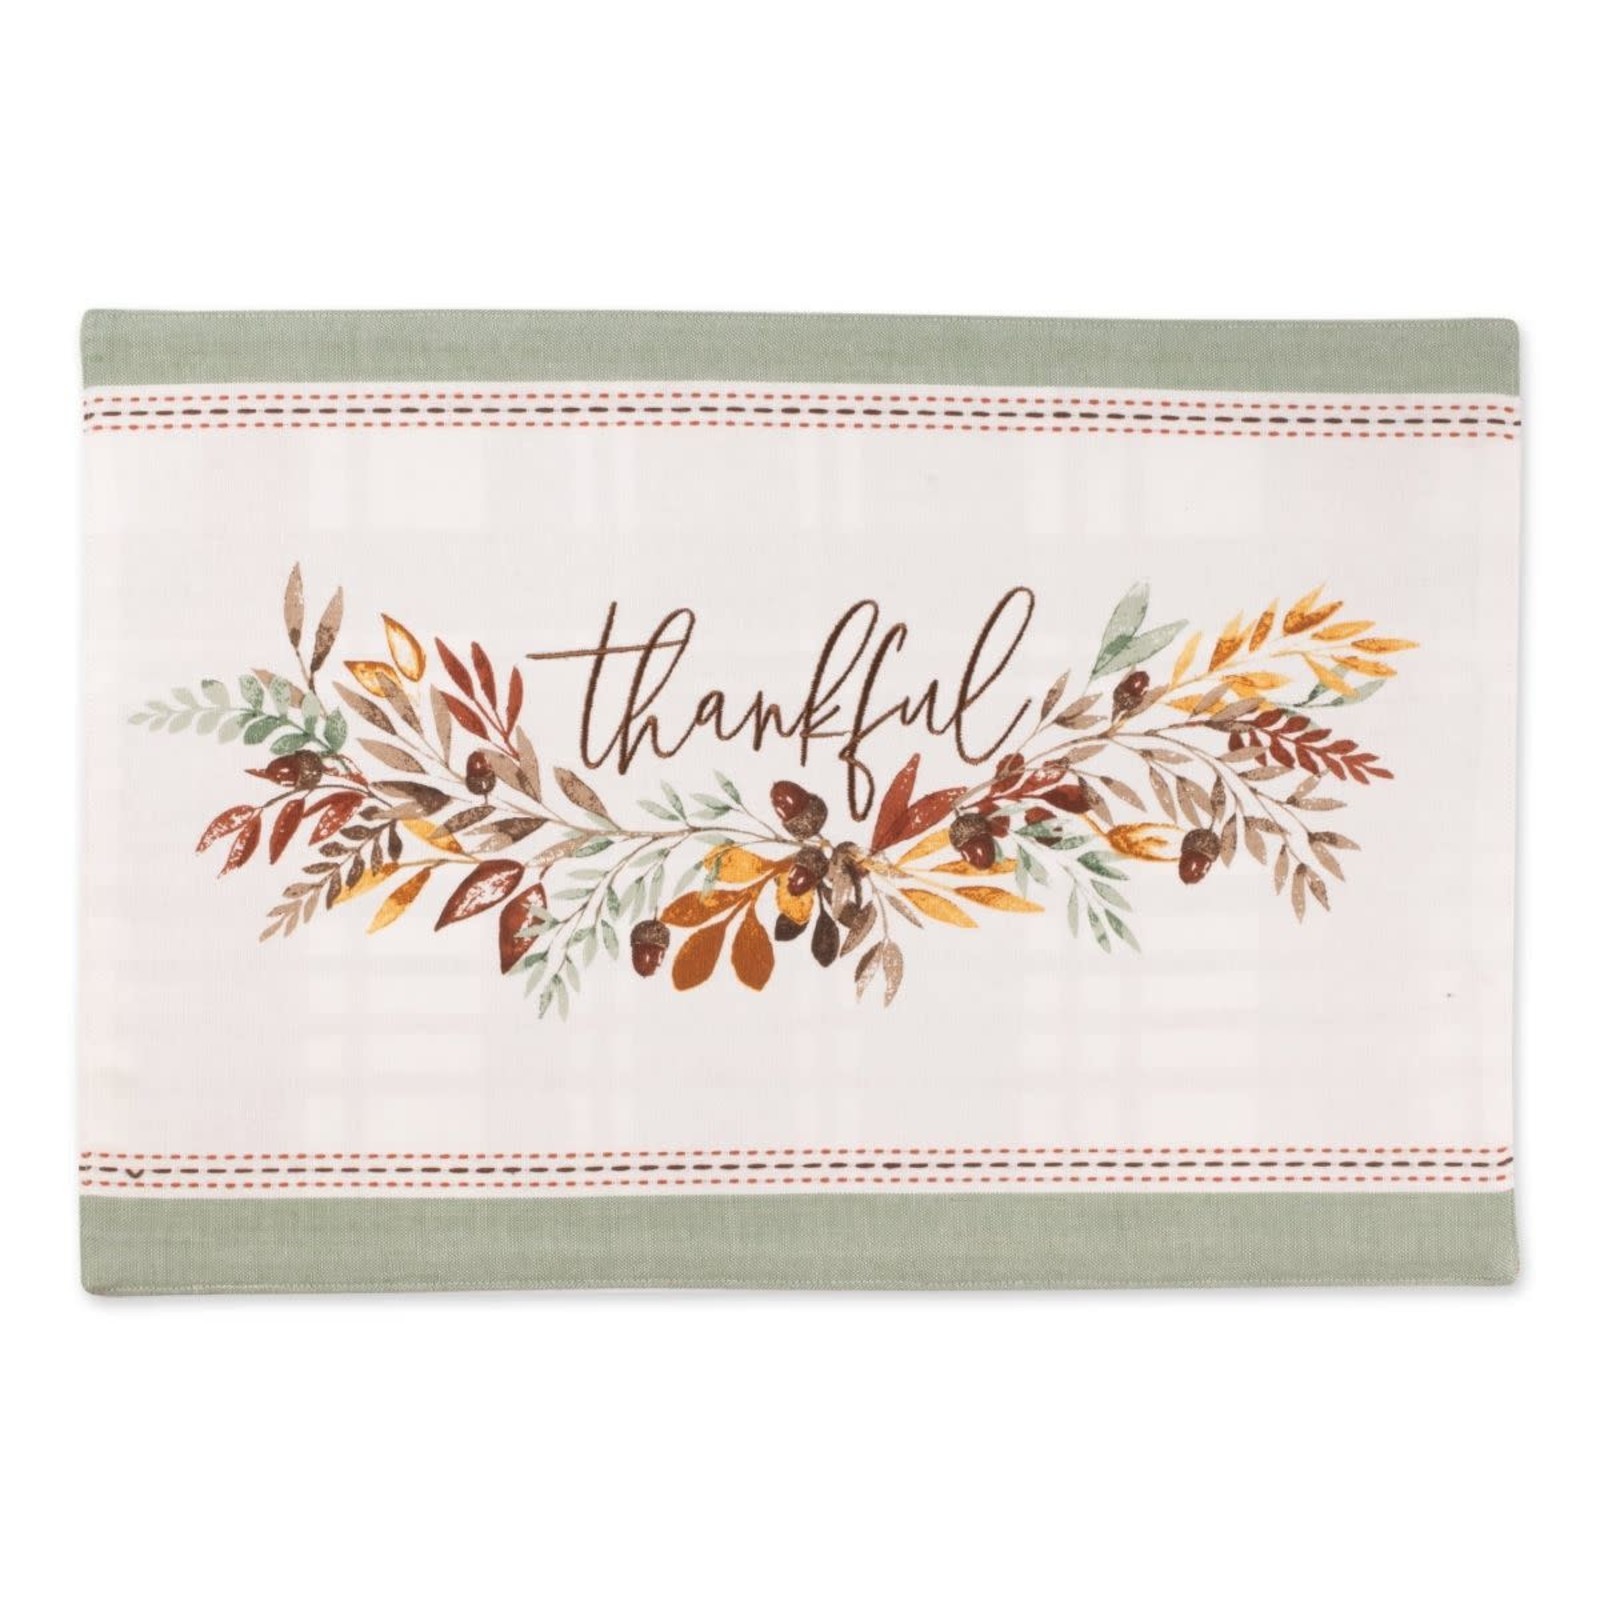 Tickled PInk Thankful Embellished Placemat   751993 loading=